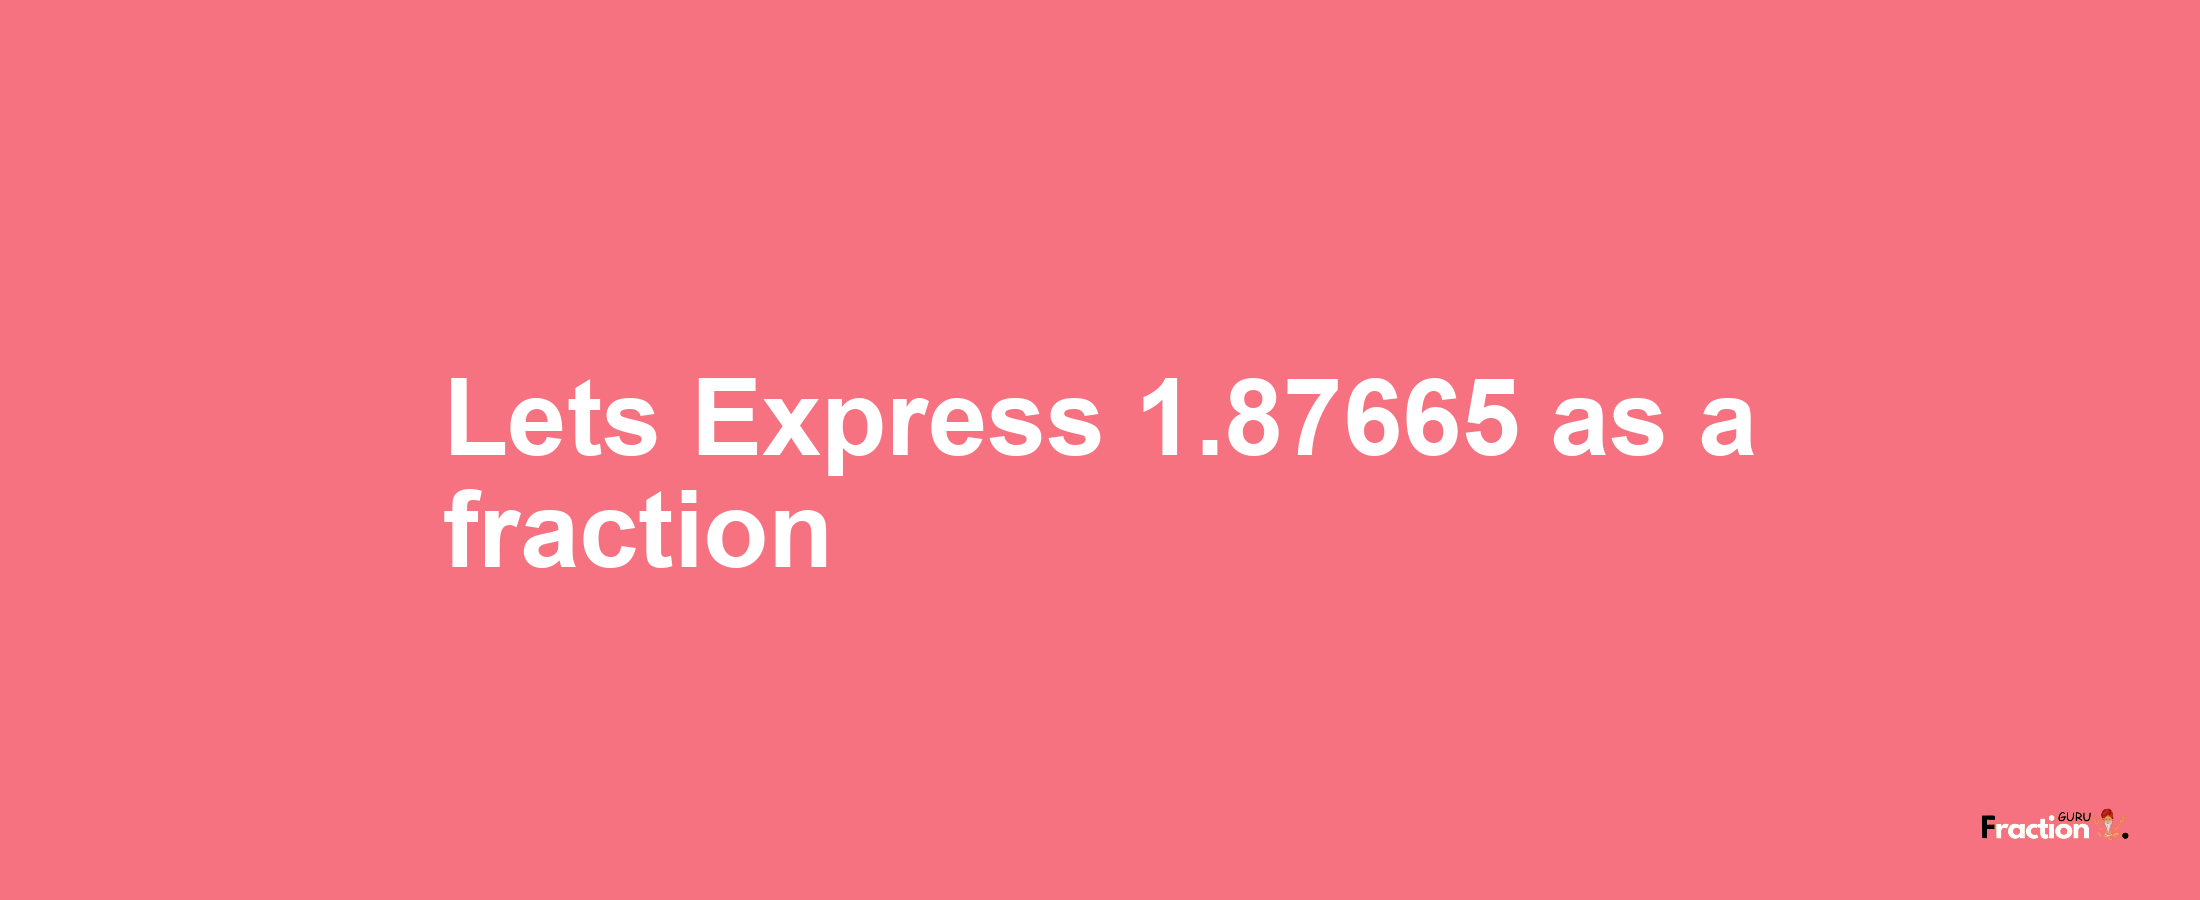 Lets Express 1.87665 as afraction